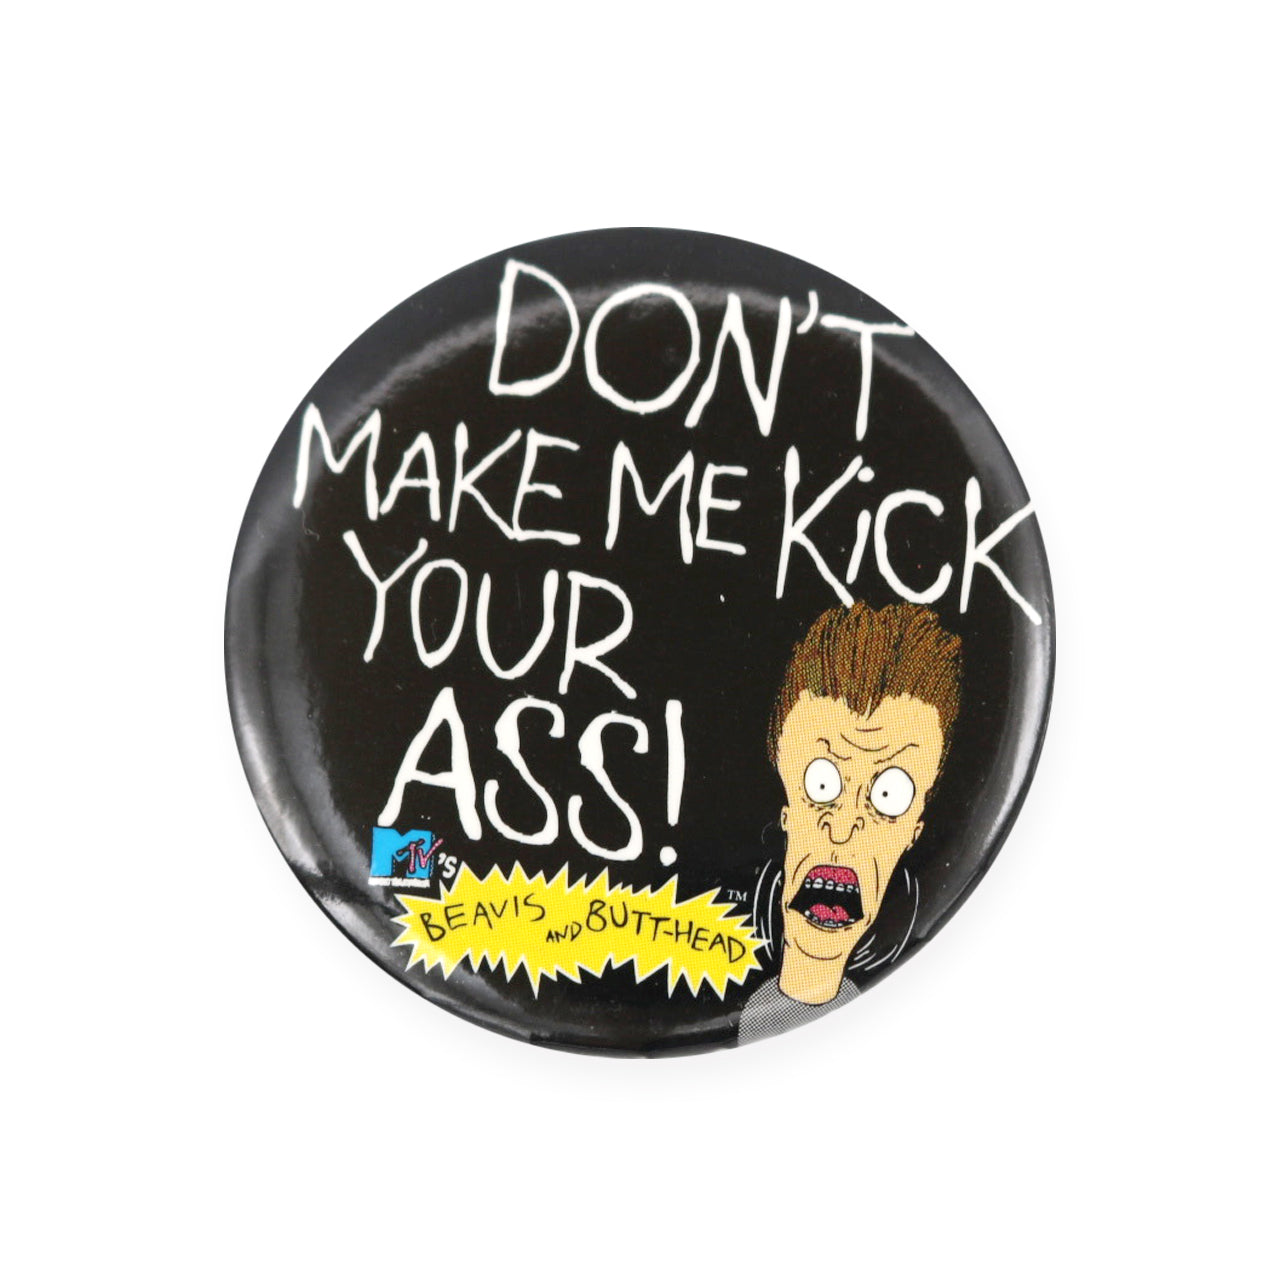 Vintage 1993 Beavis & Butthead Pinback Button by MTV.  Add a little flair to your jacket, backpack or tote with this Vintage Kick Your Ass Pinback Button!  Measures 2 inches.  Please note that due to everyone’s monitor displaying differently, the colors you see may vary.